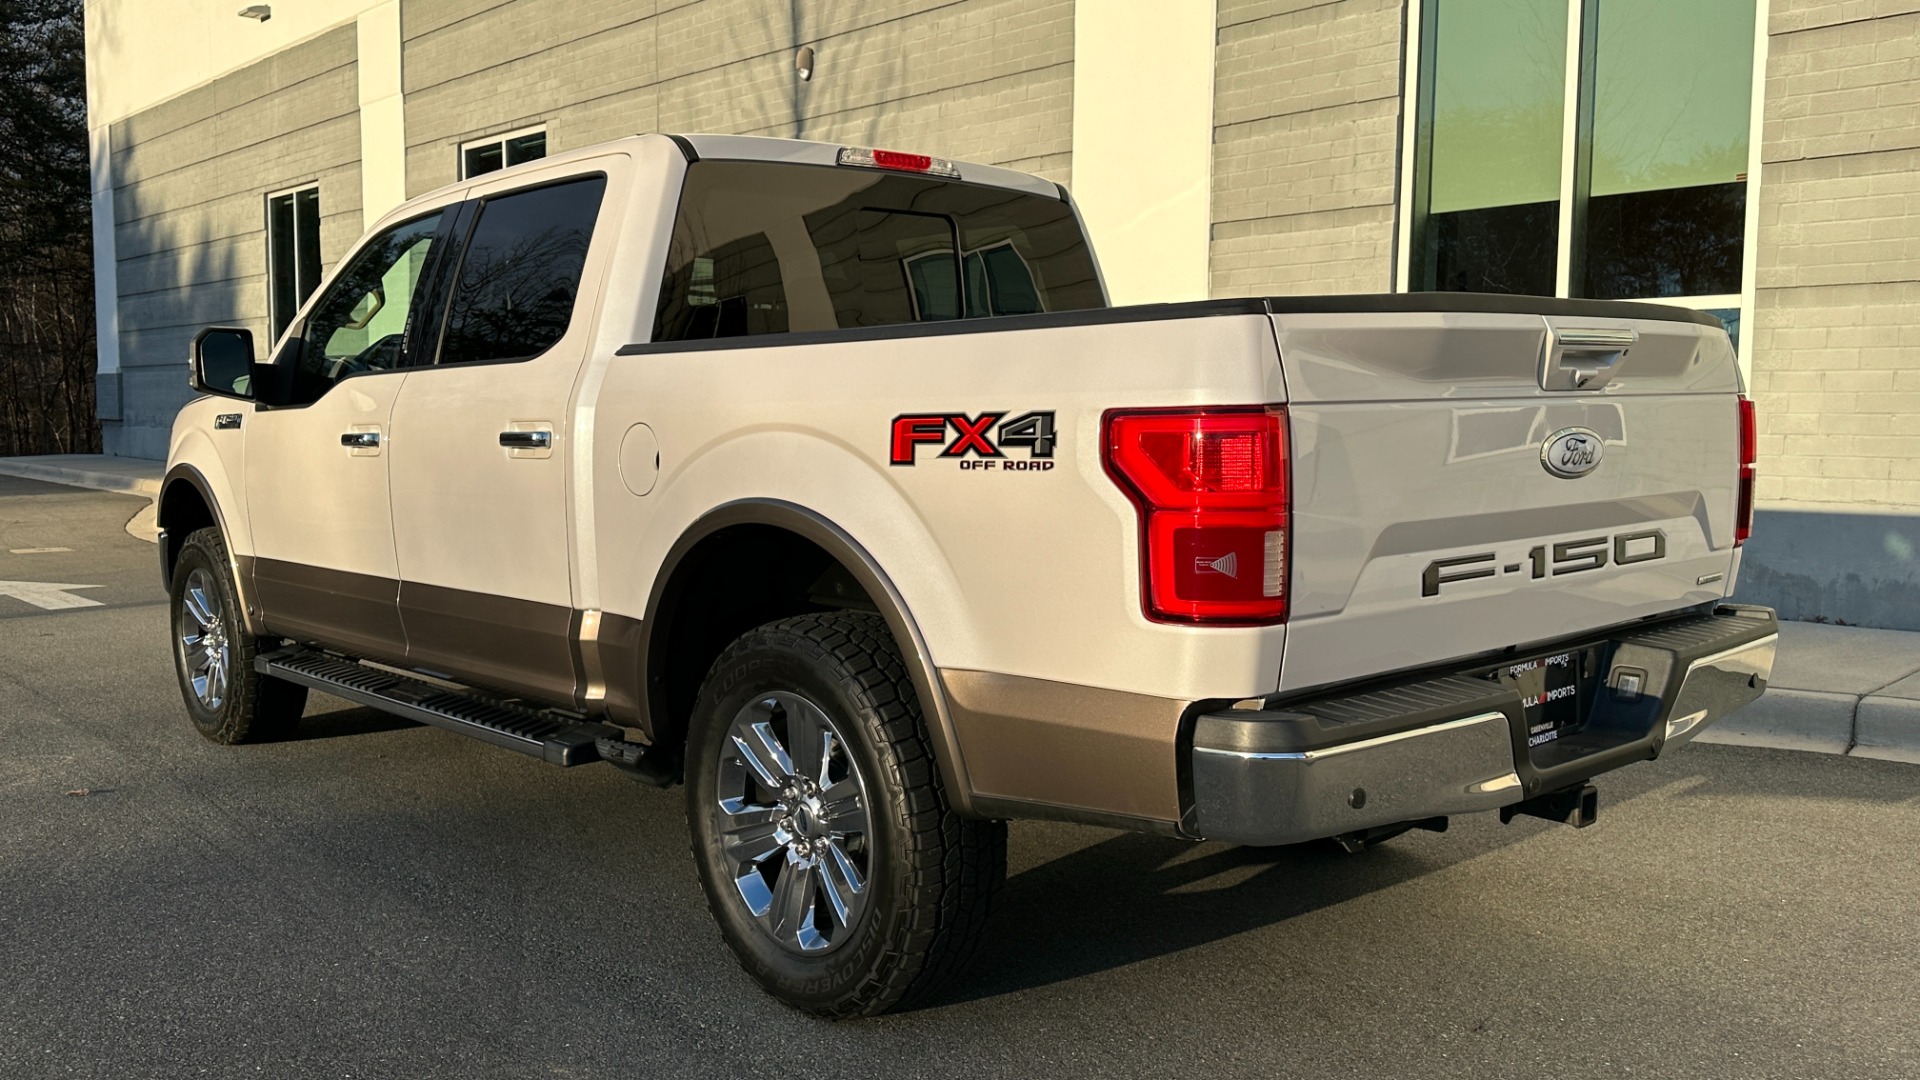 Used 2018 Ford F-150 LARIAT / 3.5L ECOBOOST / PANORAMIC ROOF / FX4 OFFROAD / MAX TOW PACKAGE for sale $35,995 at Formula Imports in Charlotte NC 28227 7